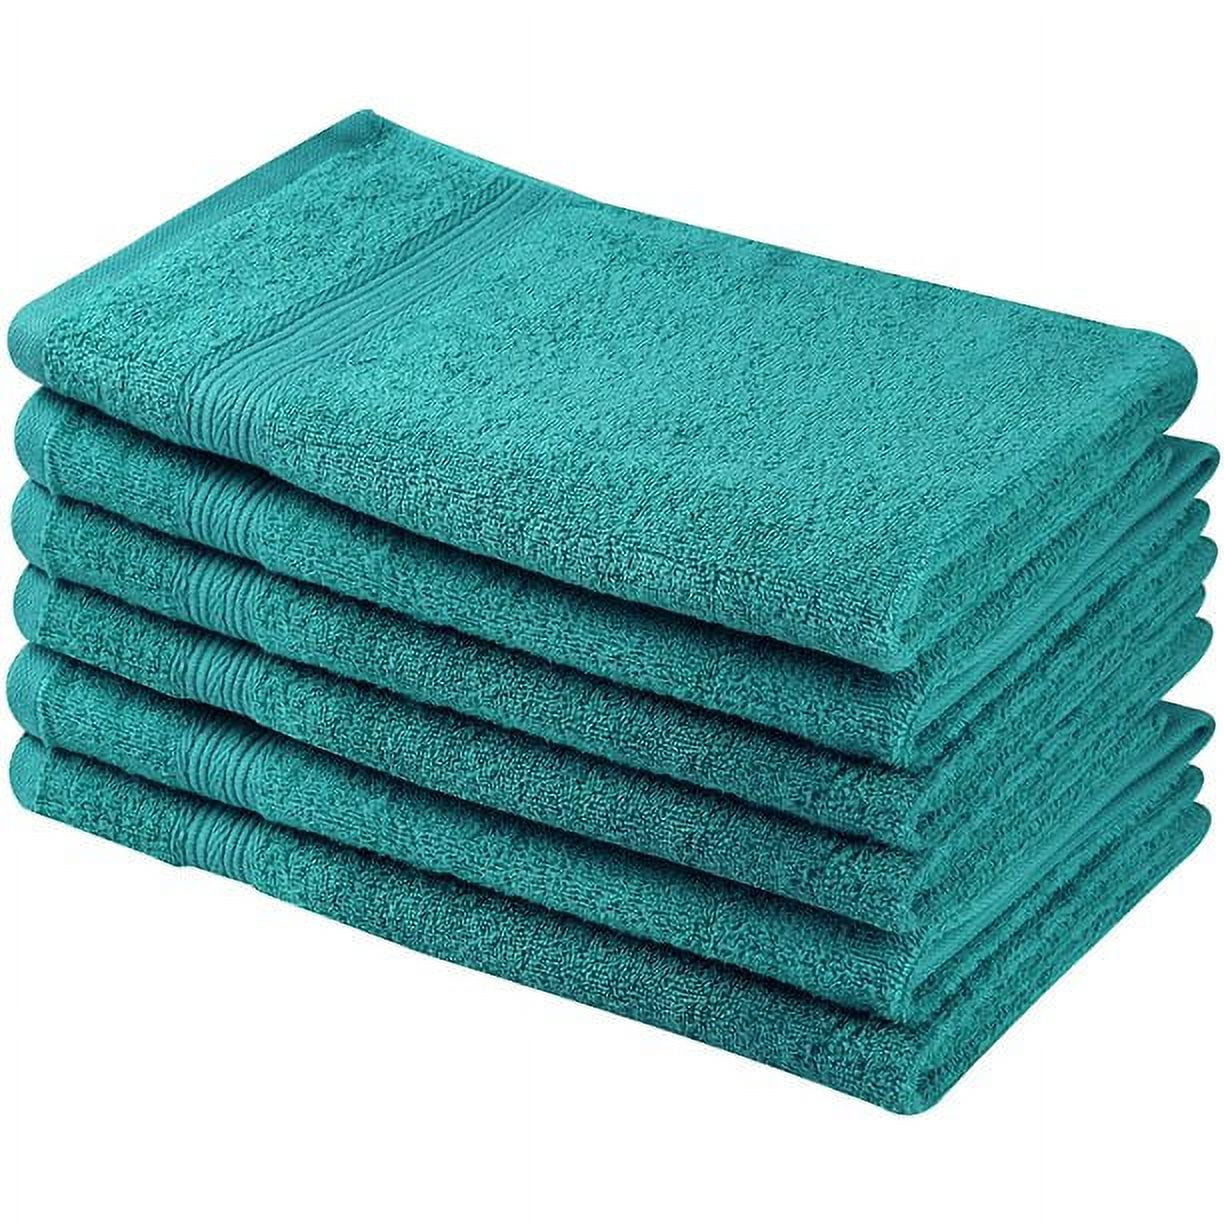 Beauty Threadz Luxury Cotton Hand Towels Teal Blue6 Pack